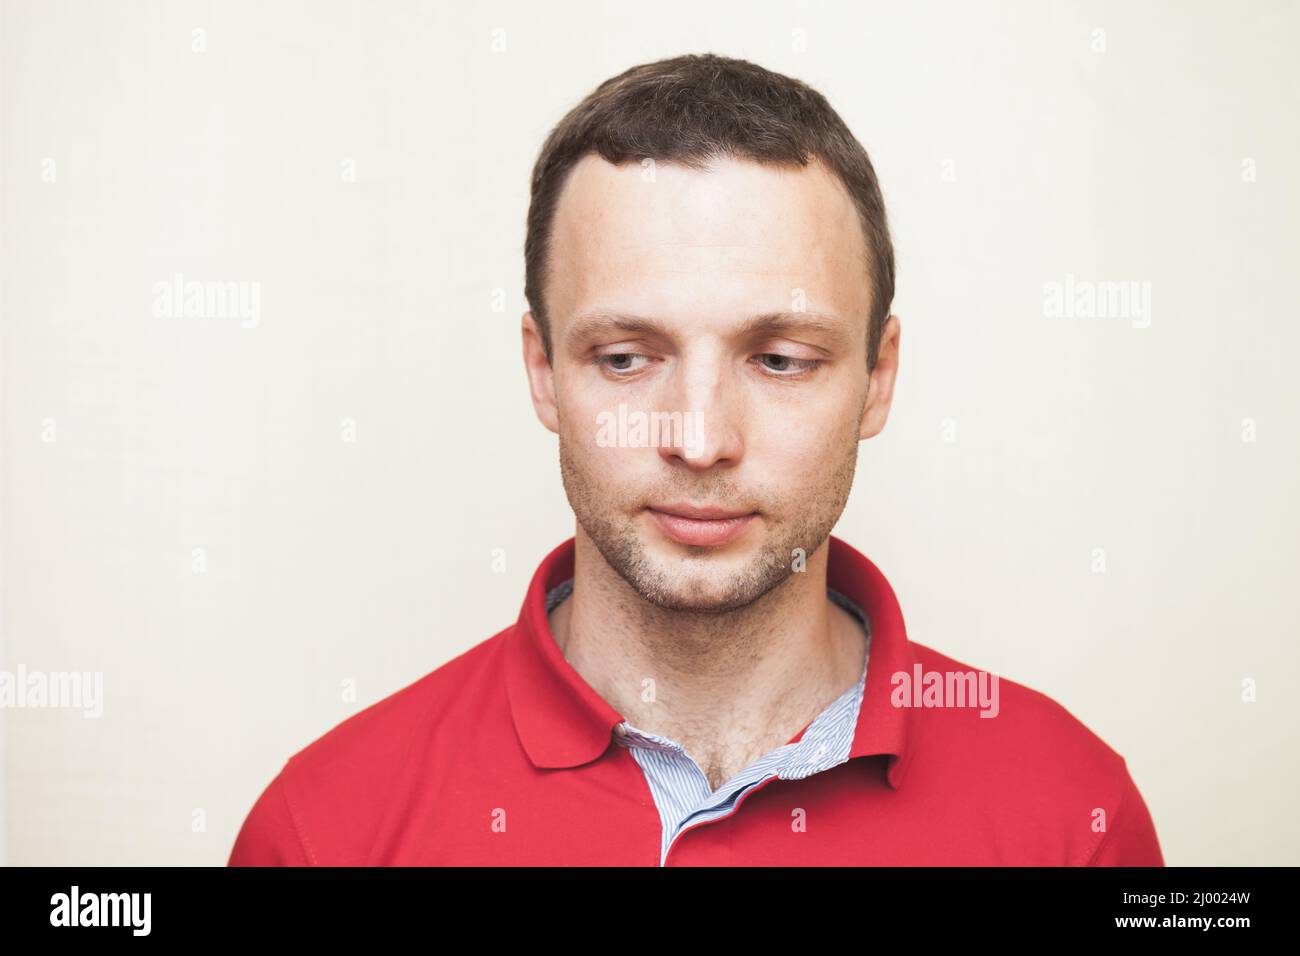 Close-up studio portrait of young adult European man in red polo shirt looking down Stock Photo